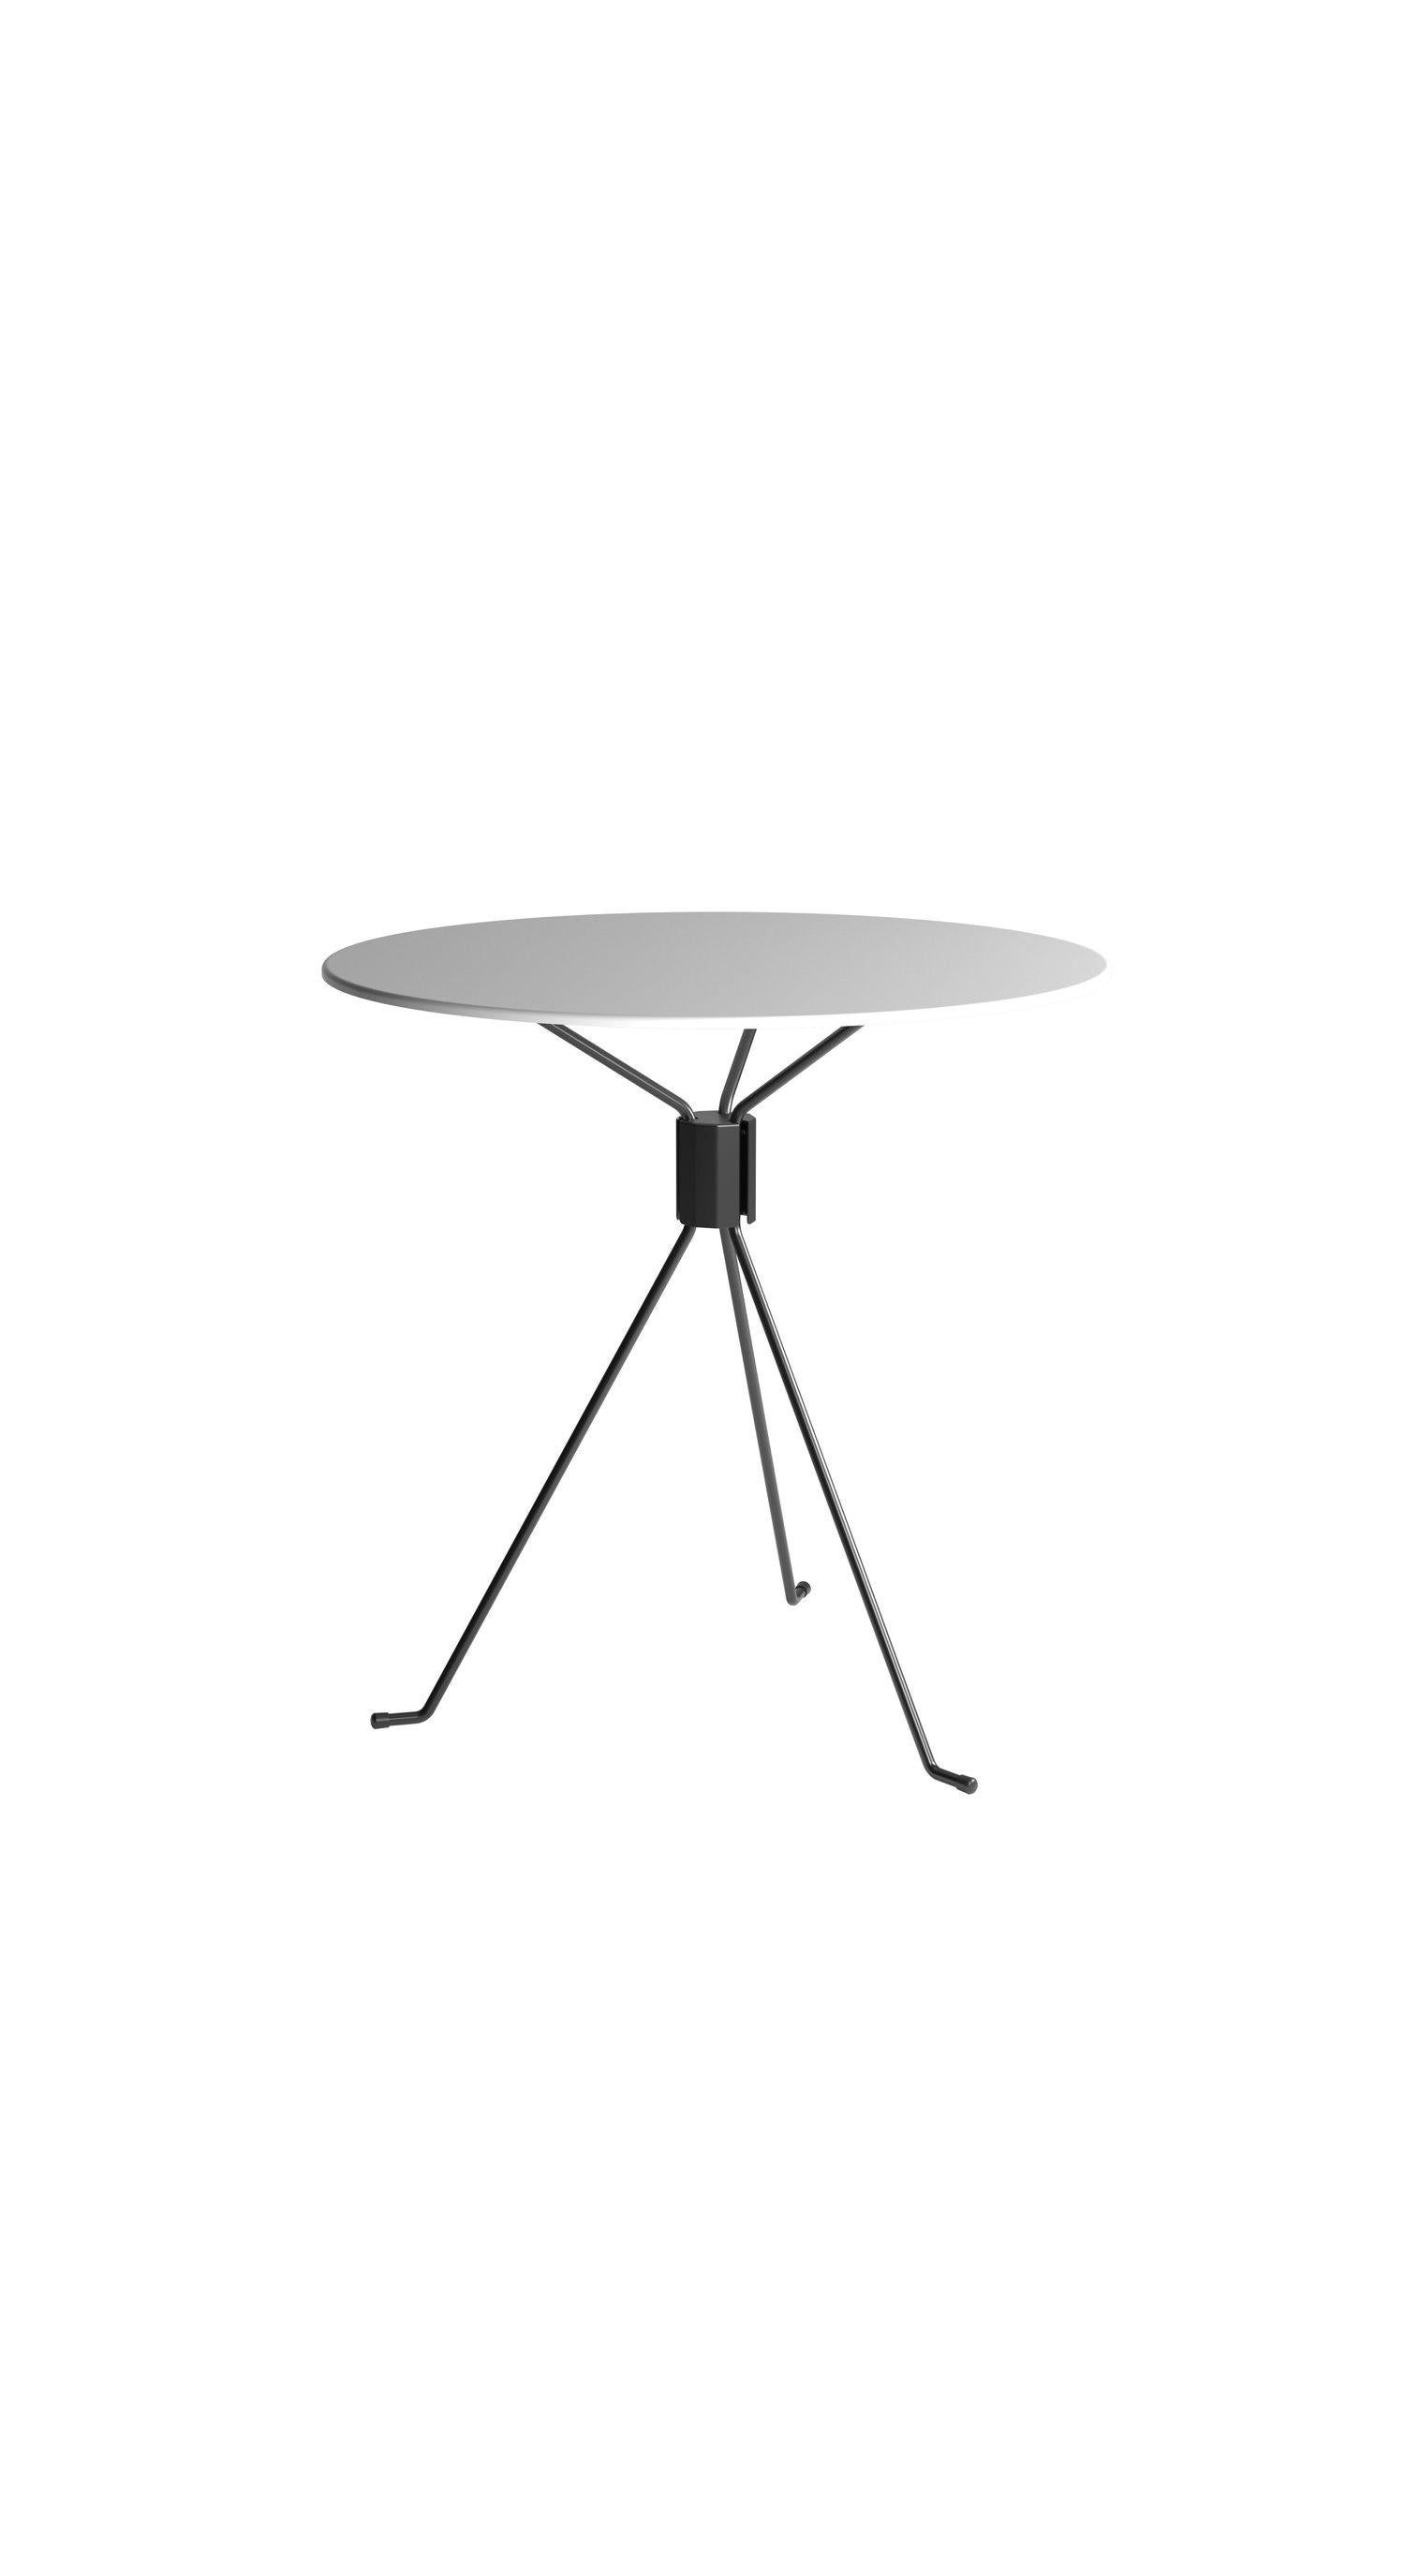 Small white Capri bond table by Cools Collection
Materials: Steel, paint.
Dimensions: Ø 75 x H 74 cm.
Available in black or white table top.

COOLS Collection was launched in 2020 by mother-and-daughter duo Stefania Andorlini and Maria